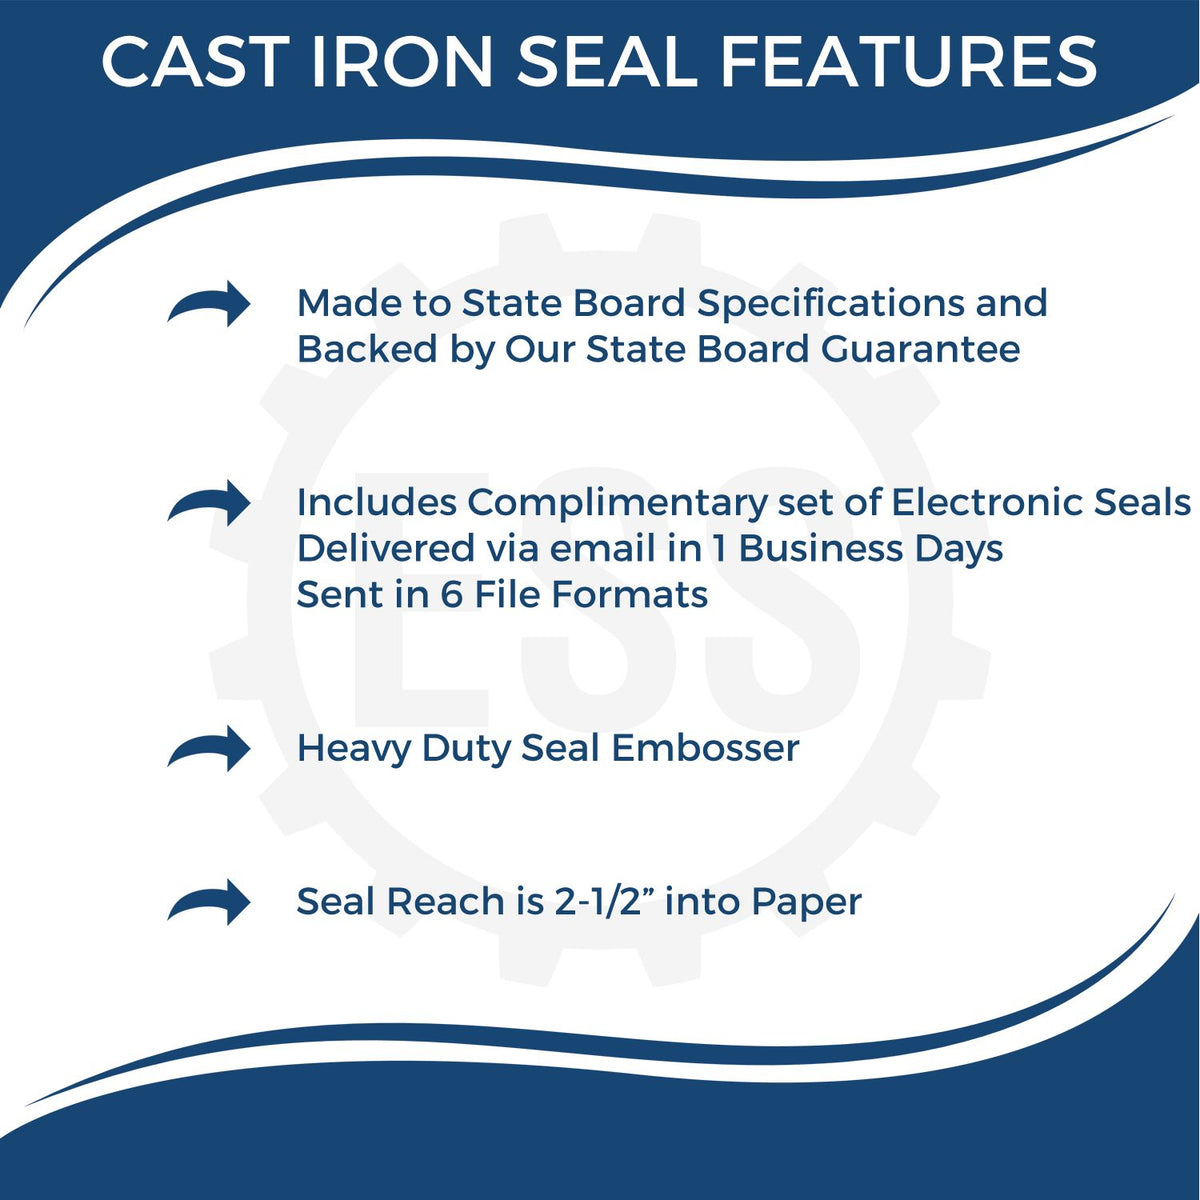 A picture of an infographic highlighting the selling points for the Heavy Duty Cast Iron Nevada Architect Embosser